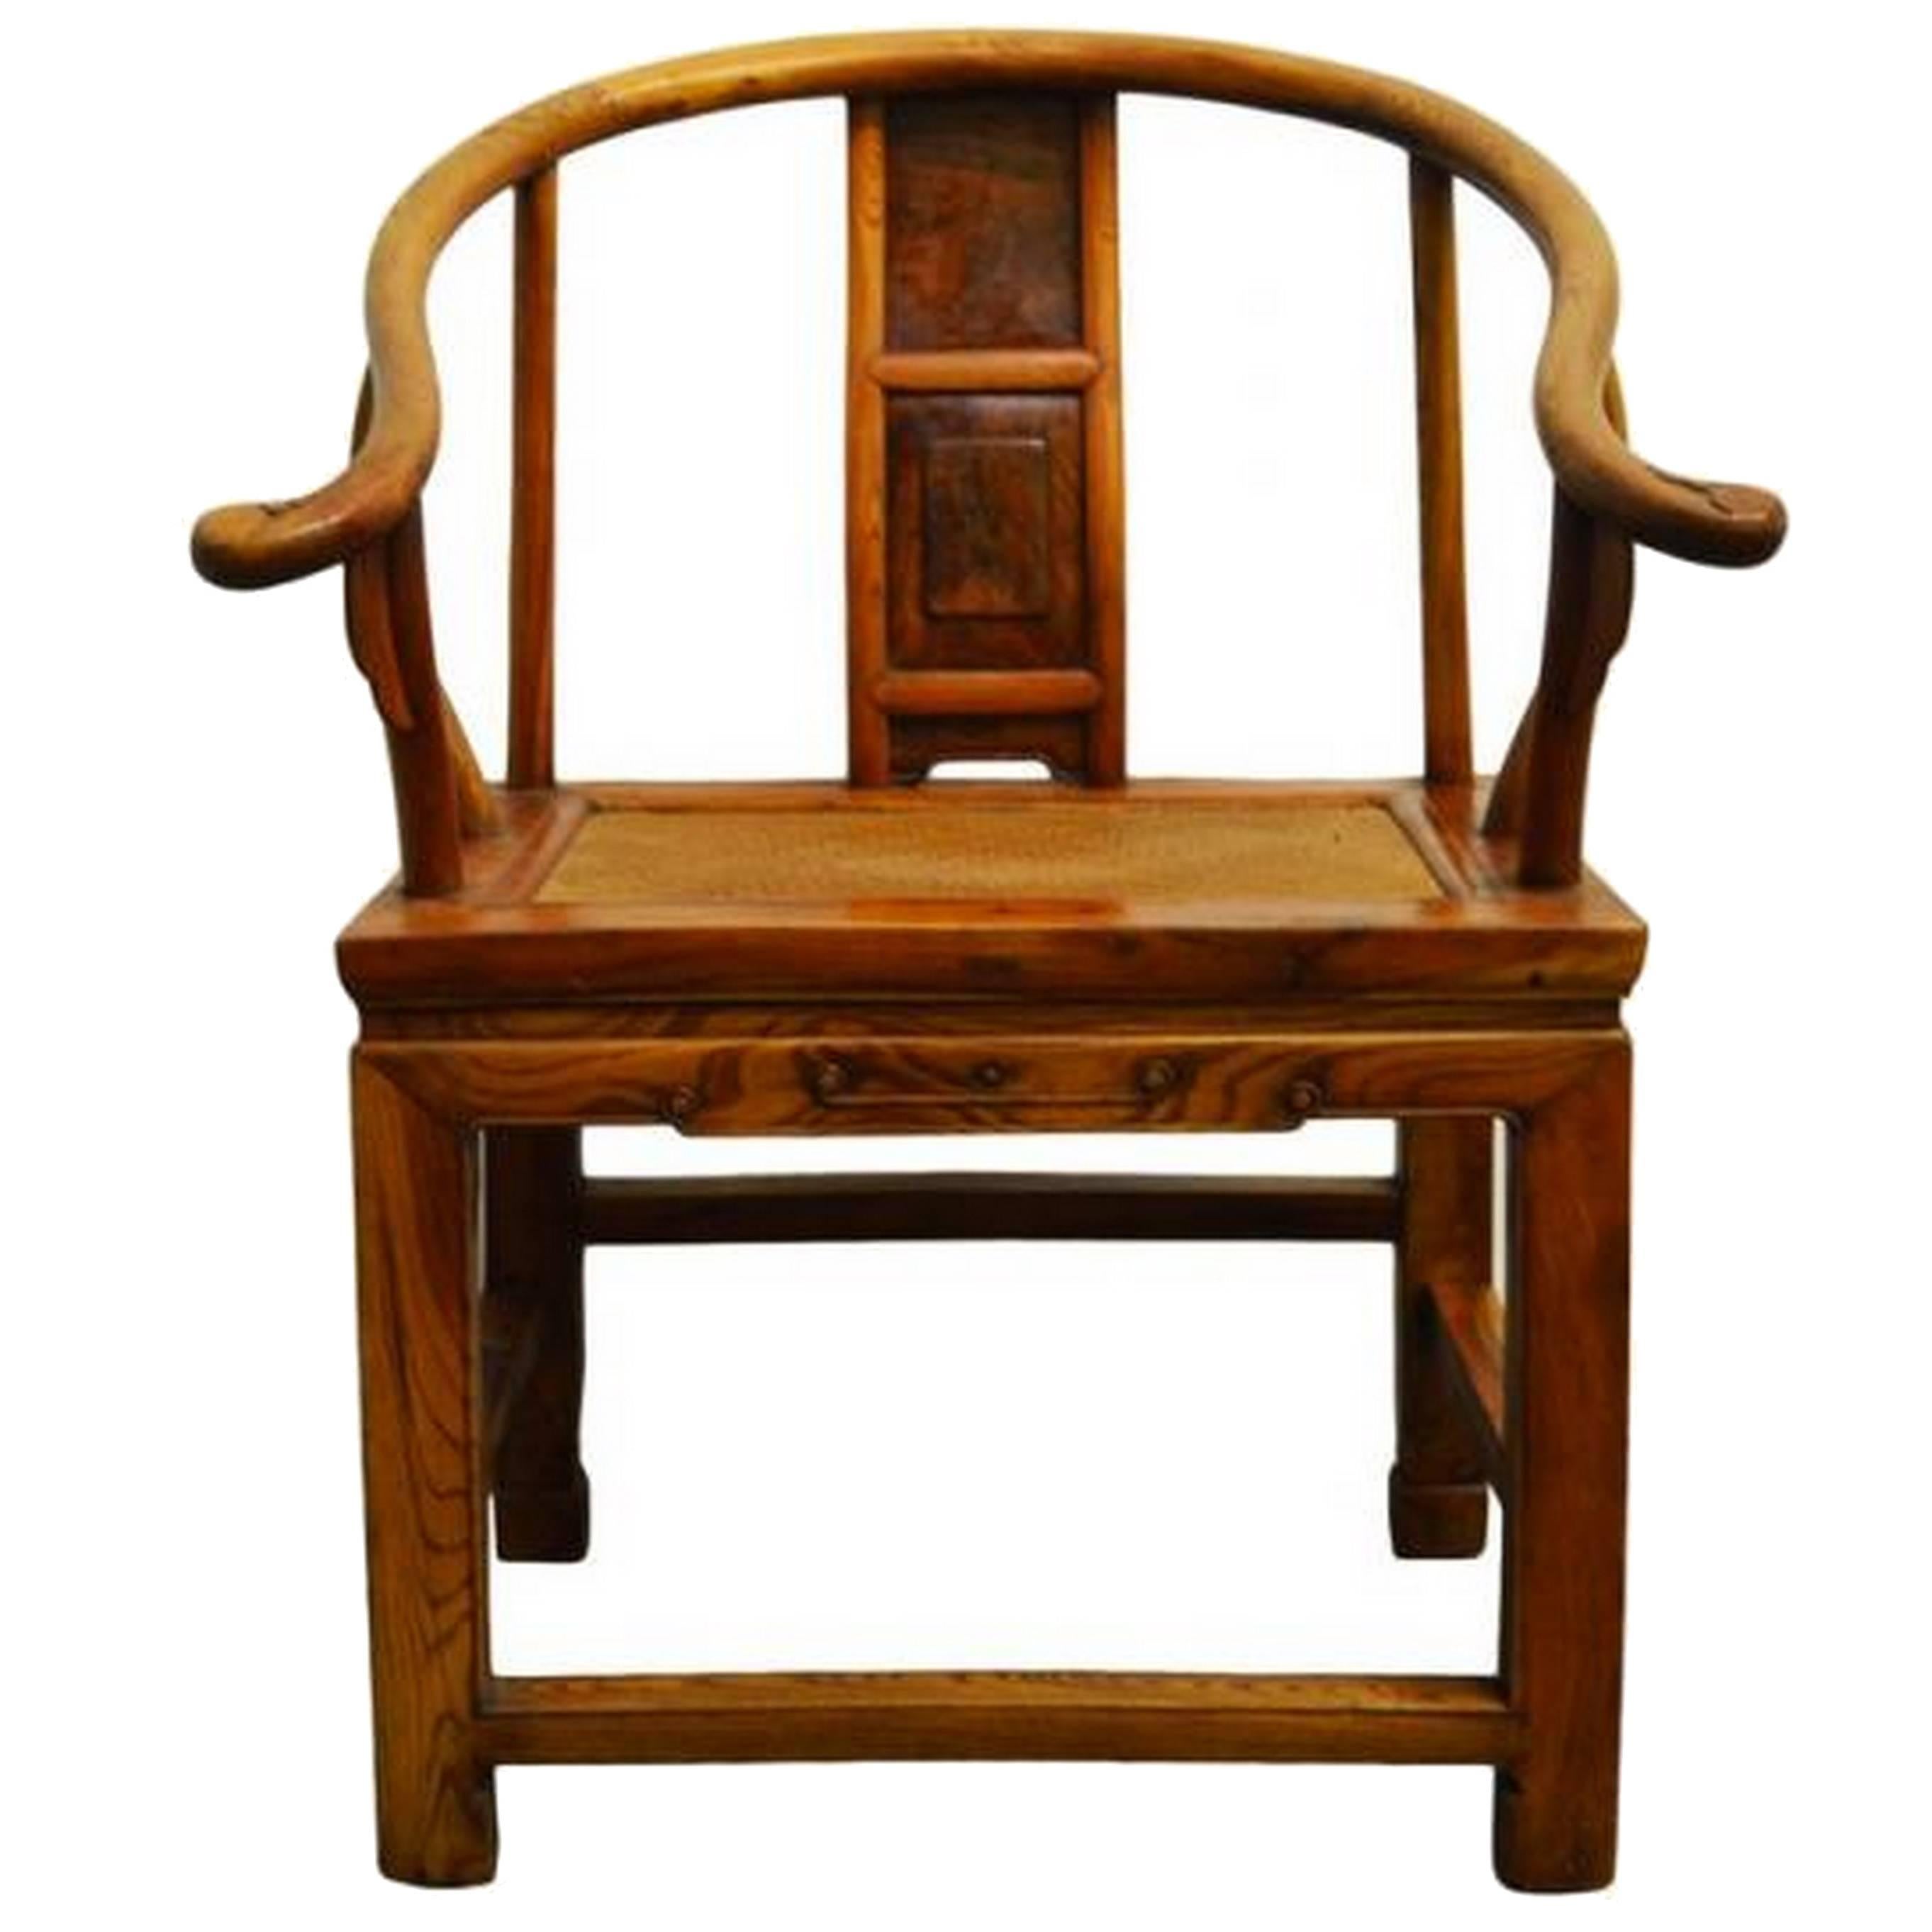 19th Century Chinese Light Brown Lacquered Horseshoe Back Chair with Rattan Seat